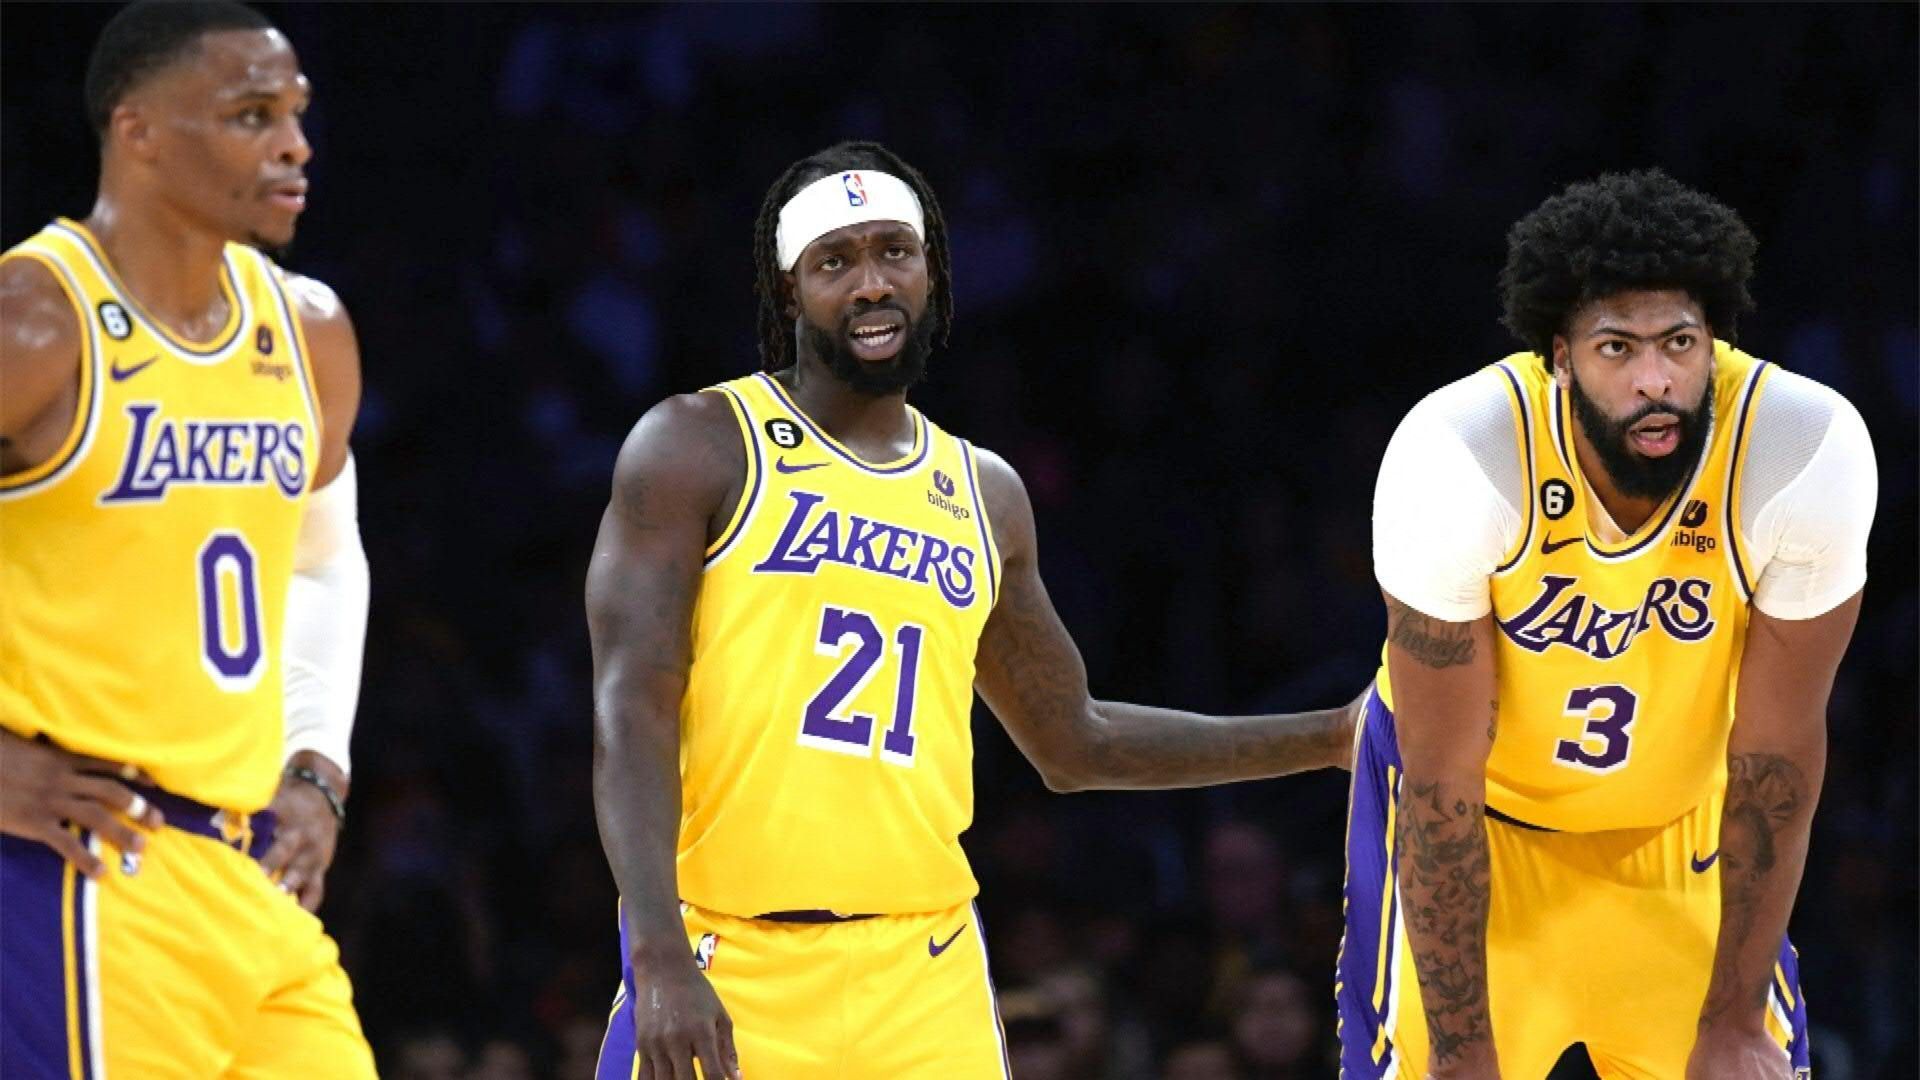 Still without Schröder: L.A. Lakers go down